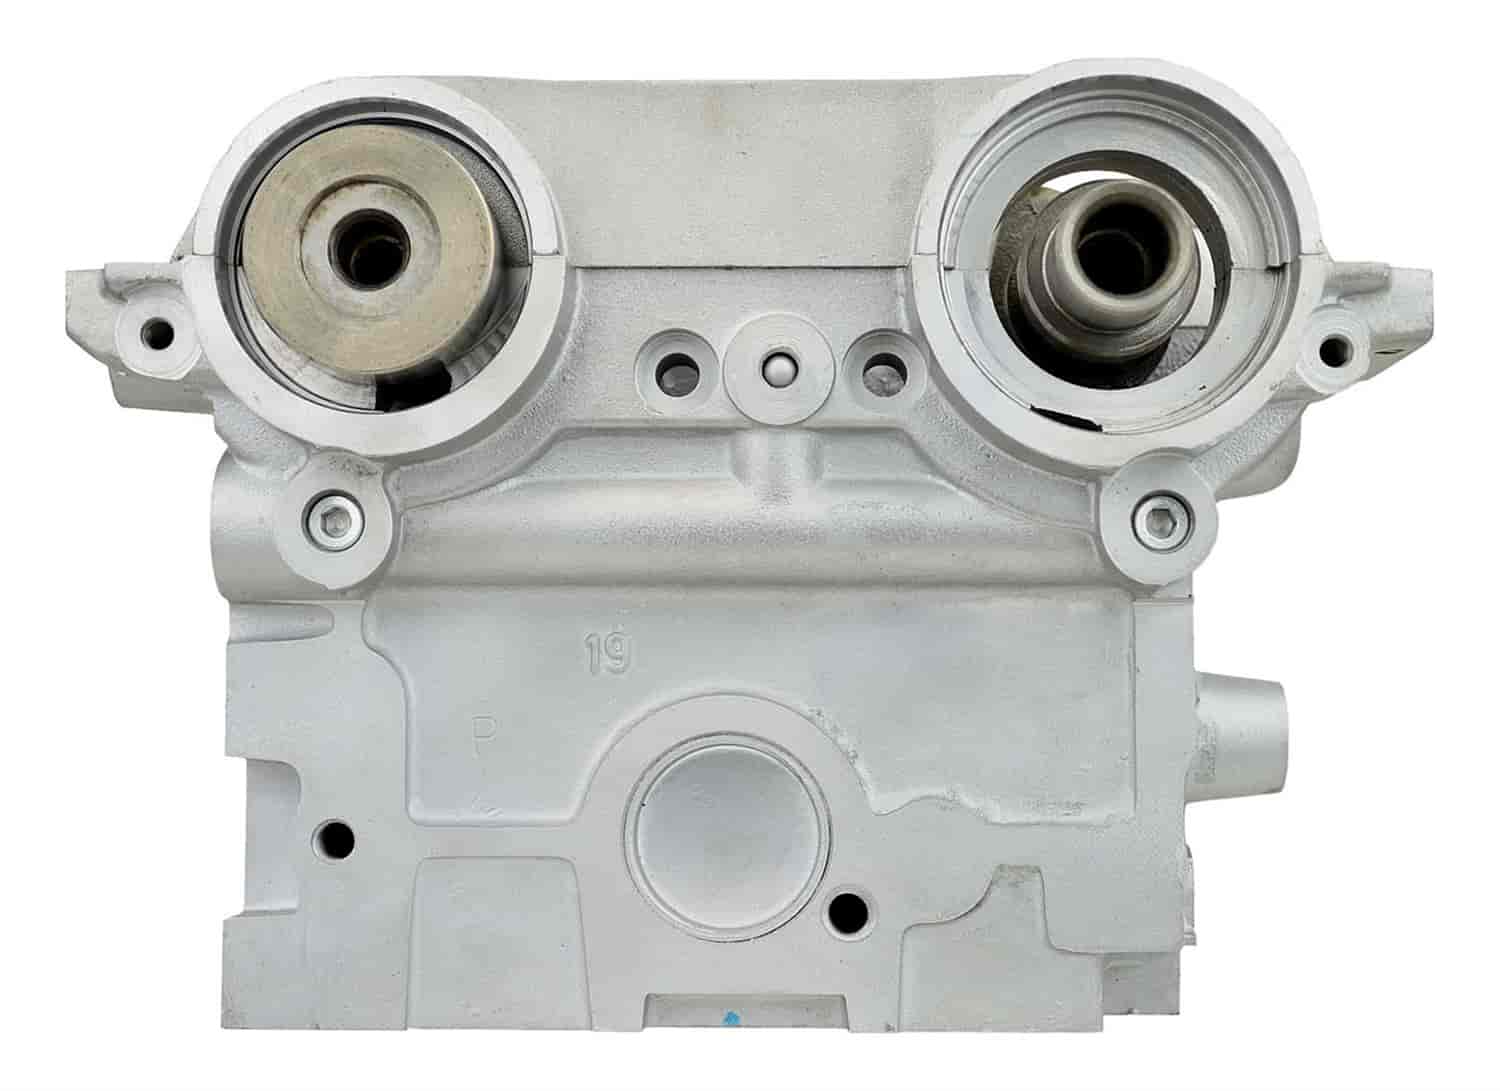 Remanufactured Cylinder Head for 2000-2002 Ford/Mercury with 2.0L L4